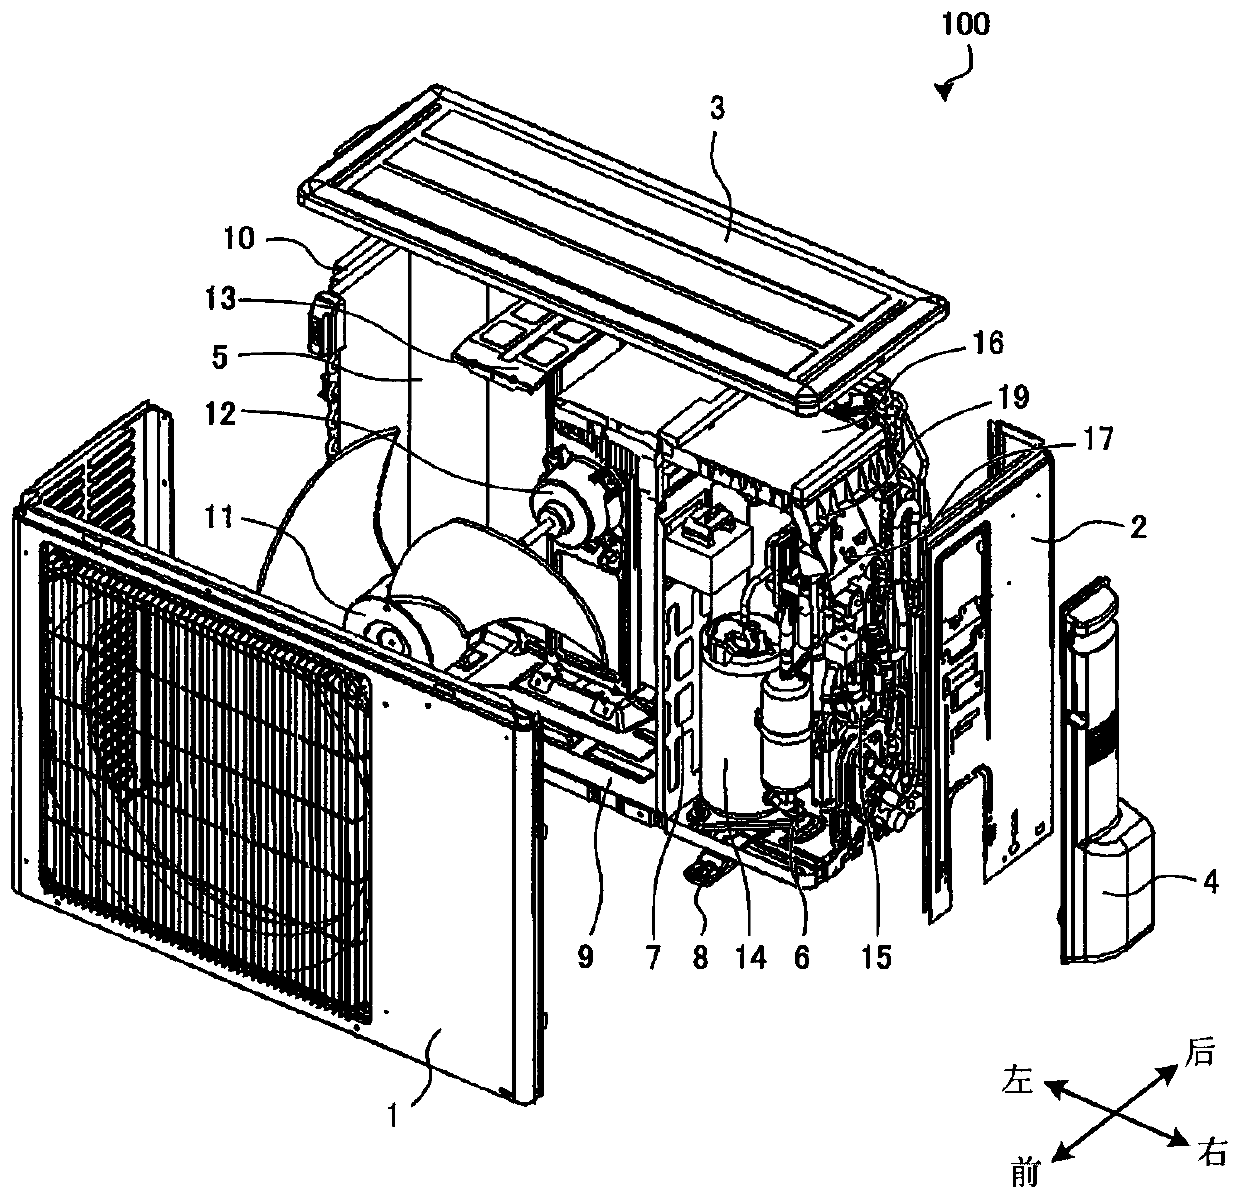 Outdoor unit of air conditioning device